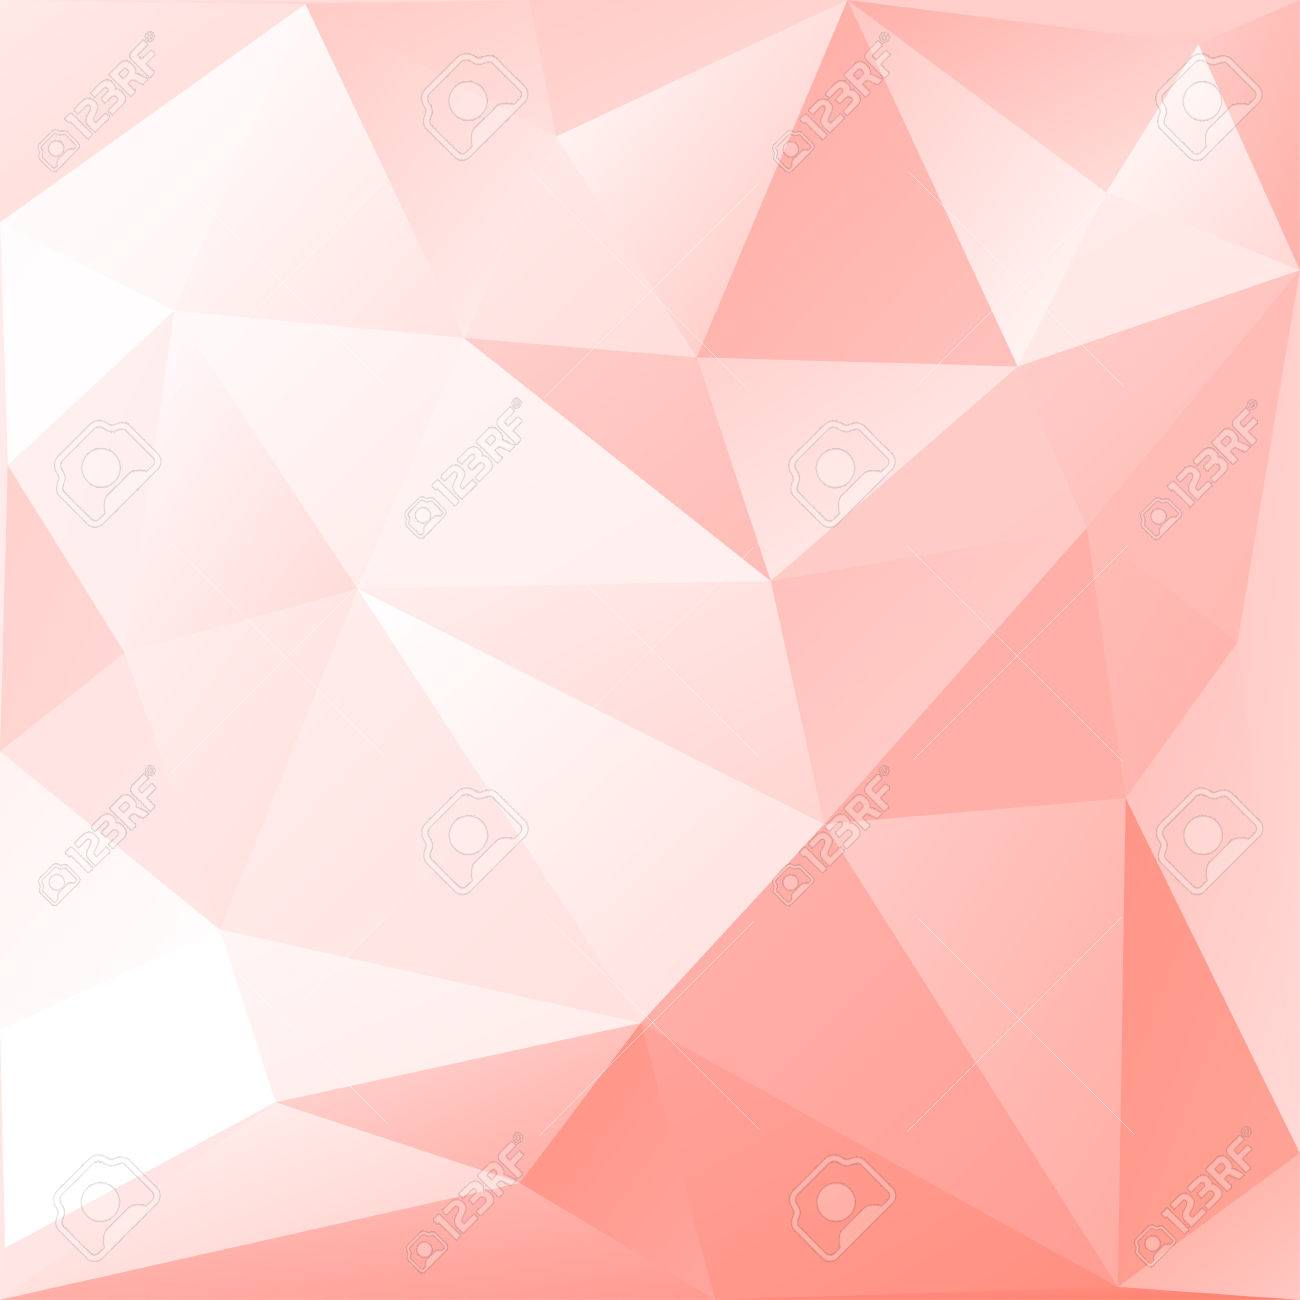 Abstract Low Poly Background Of Triangles In Peach Colors Royalty